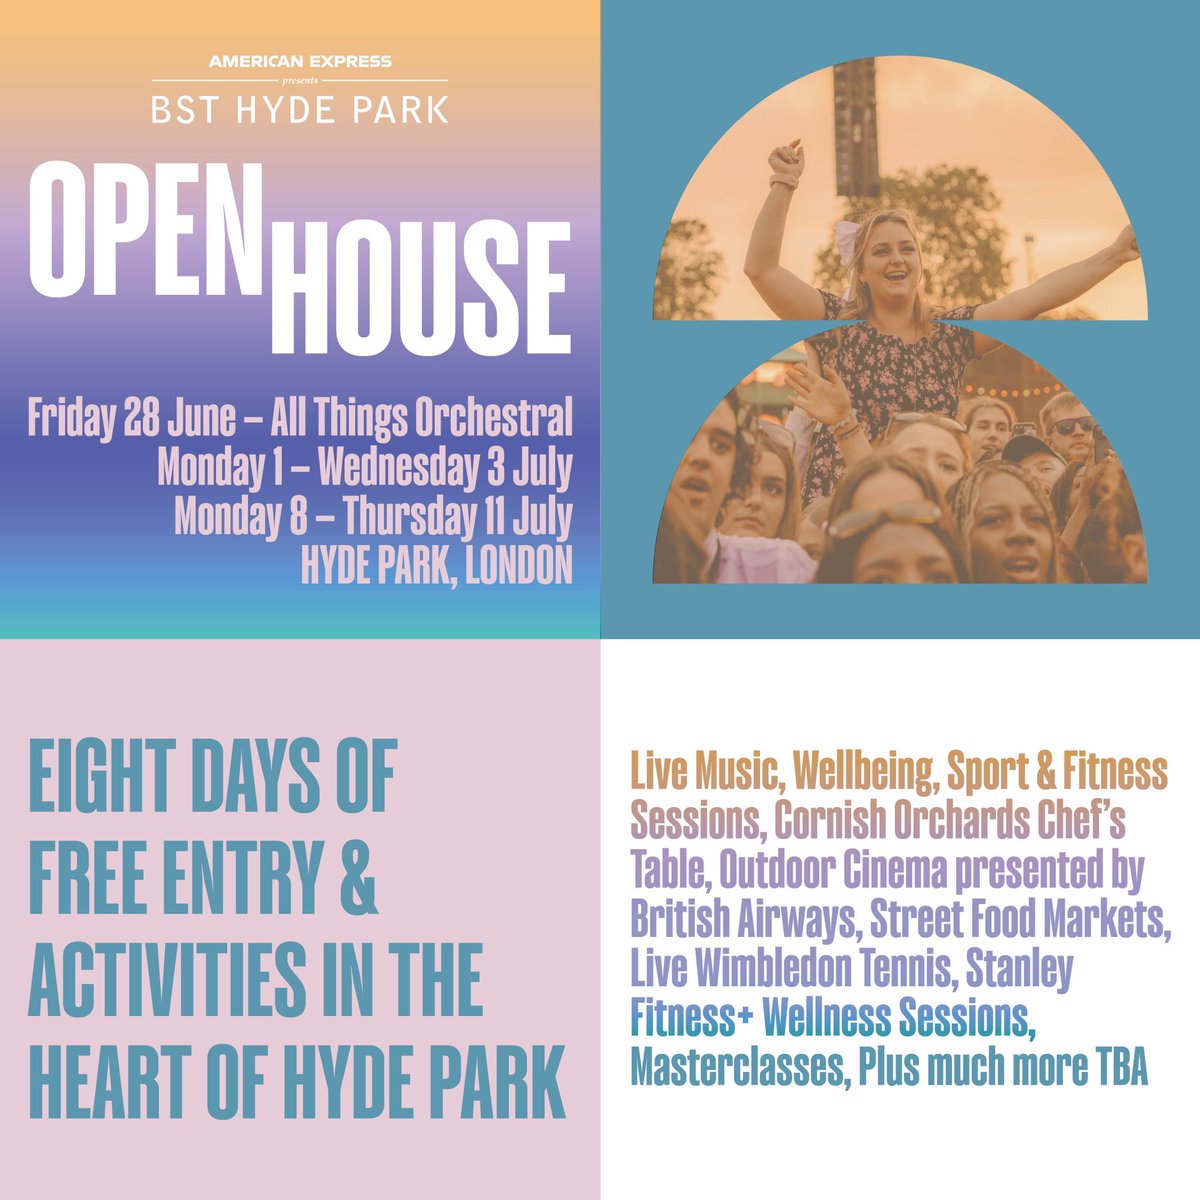 . @BSTHydePark announce Open House Enjoy the long days and warm summer nights with 8 days of activities and FREE entry in the heart of Hyde Park! Read More Here gigview.co.uk #music #news #hydepark #openhouse